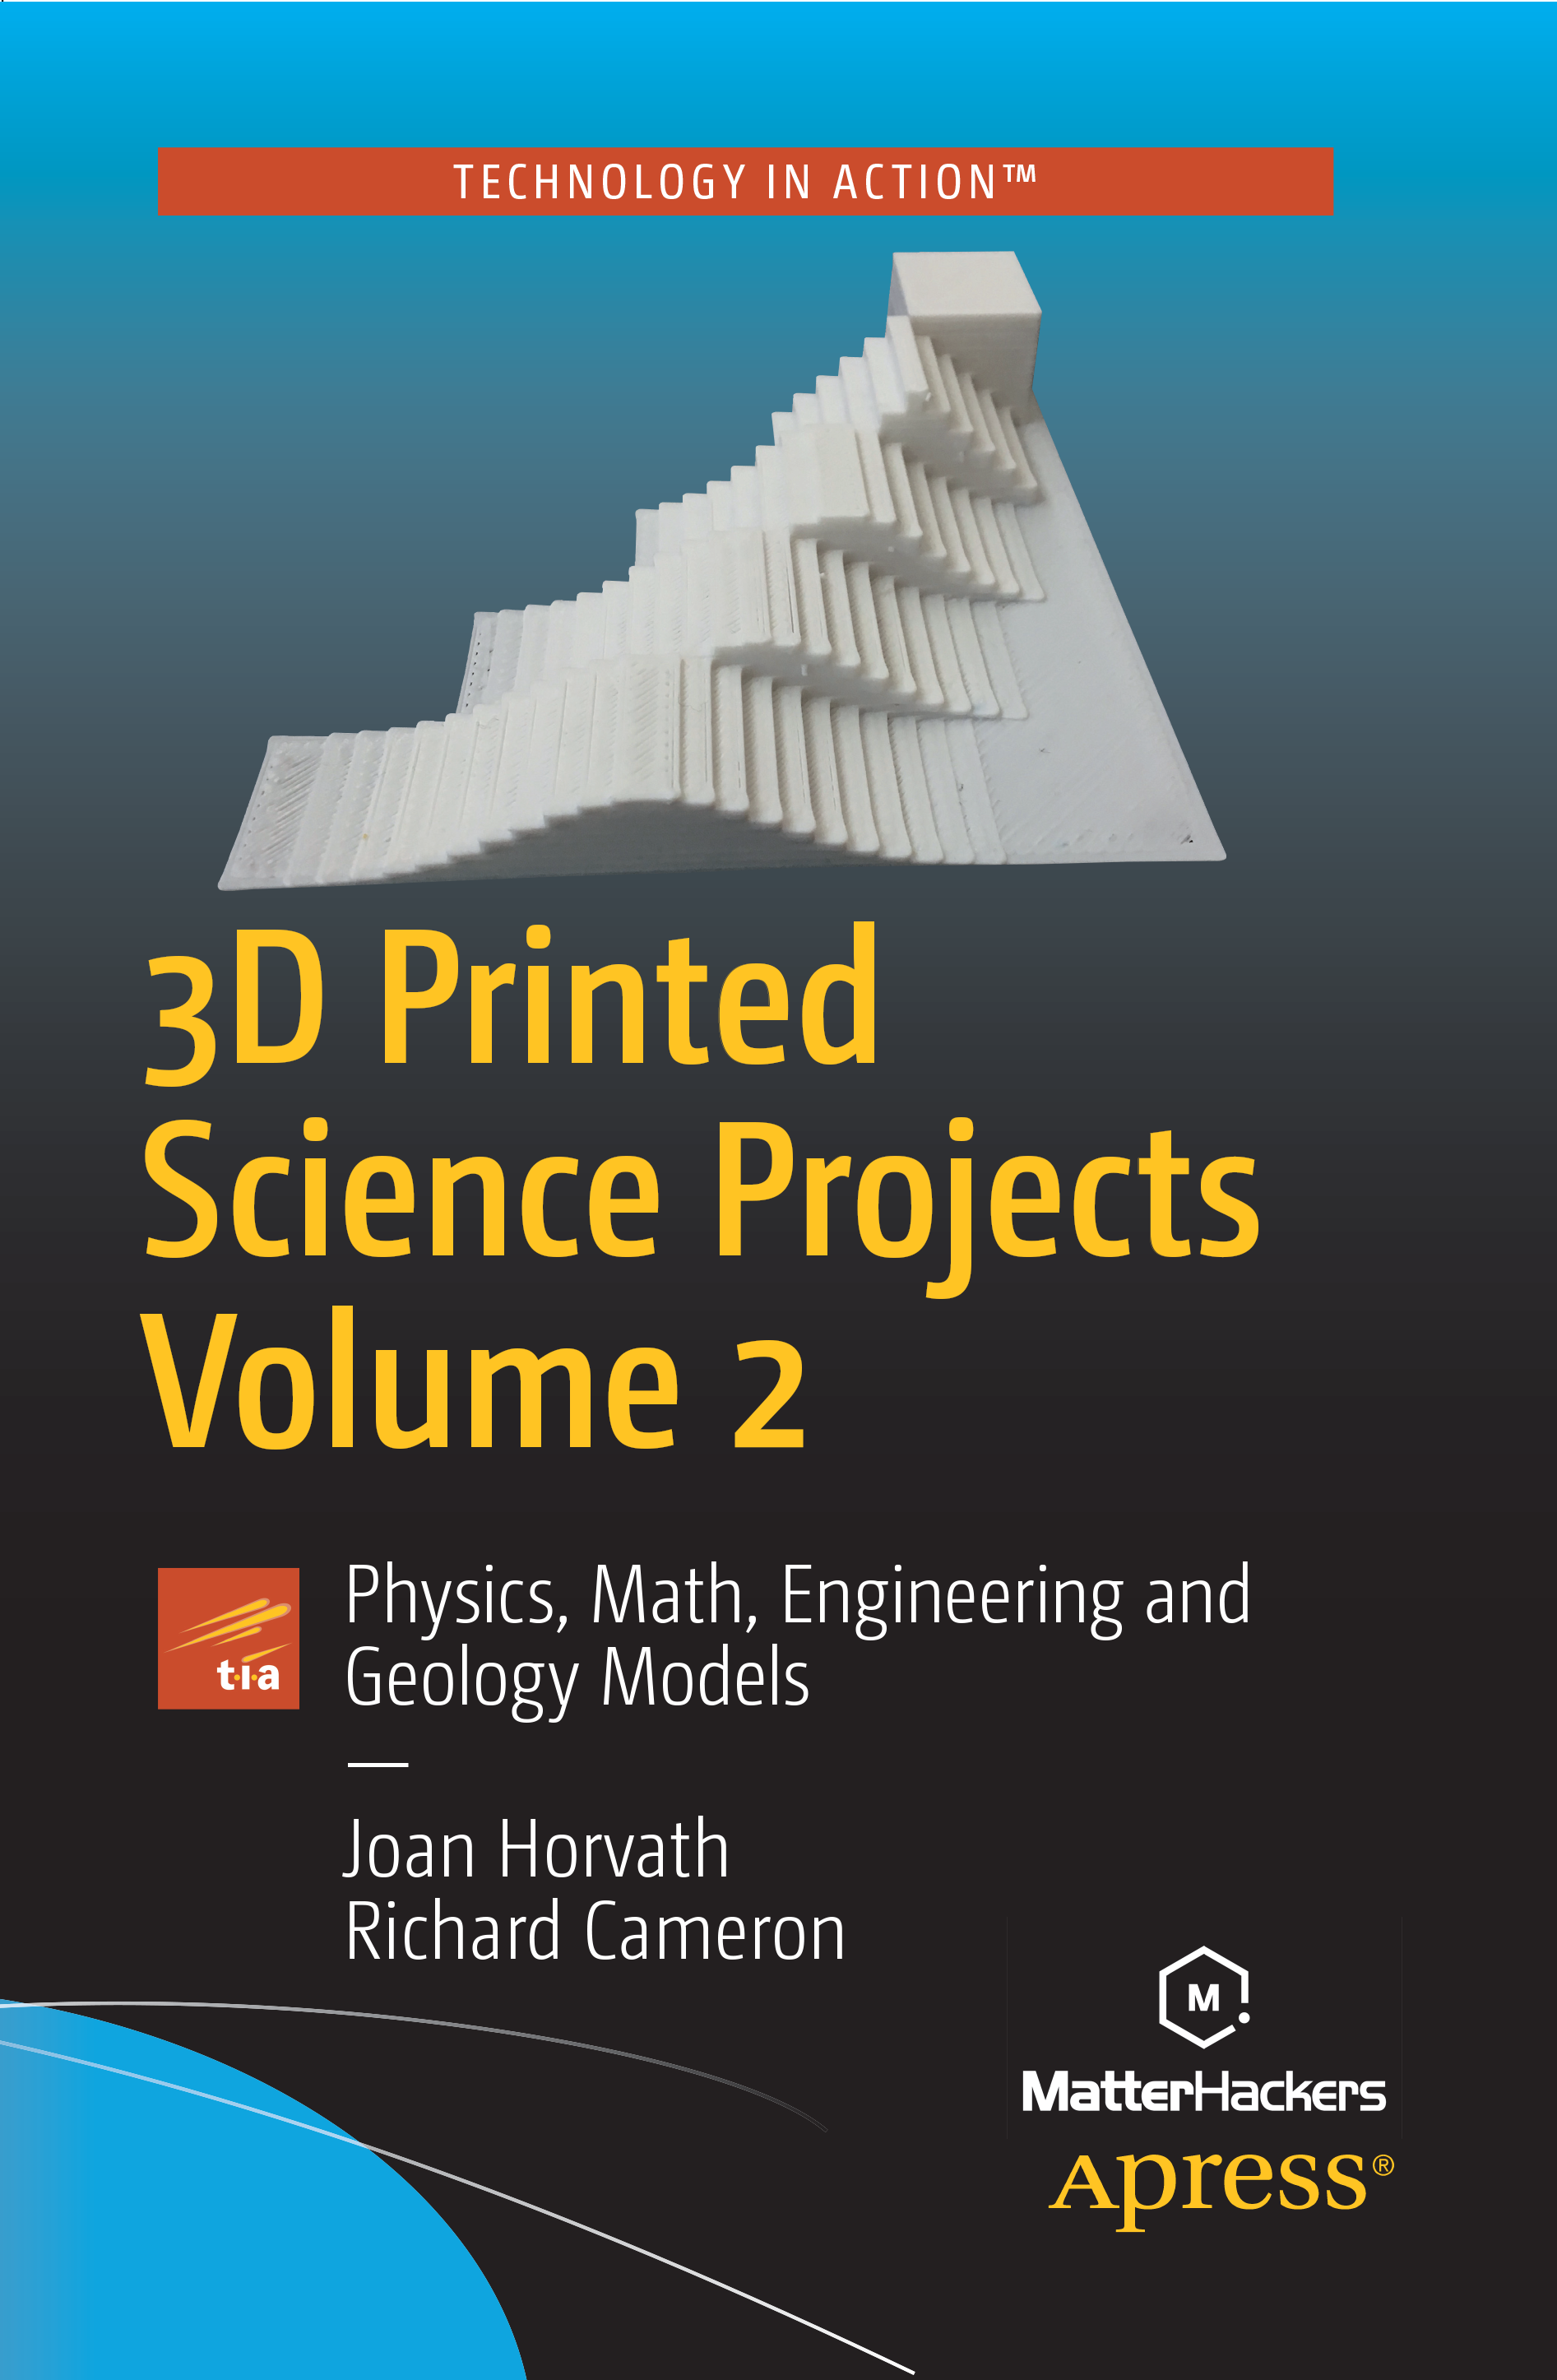 3D Printed Science Projects Volume 2  (Apress, 2017)